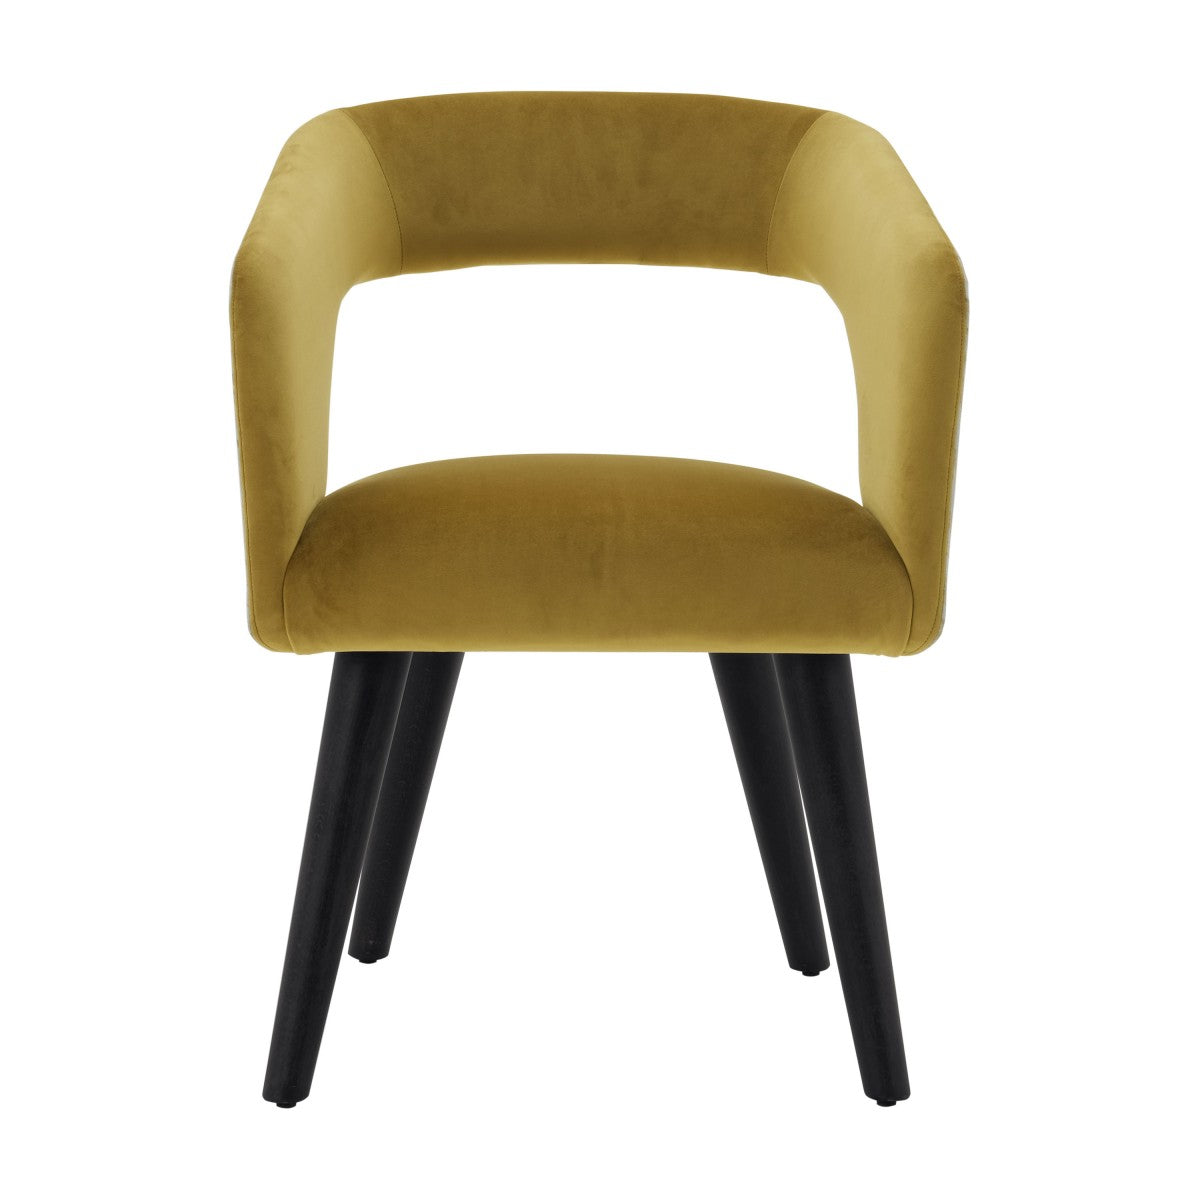 Platis Bespoke Upholstered Modern Contemporary Dining Armchair Chair MS029A Custom Made To Order